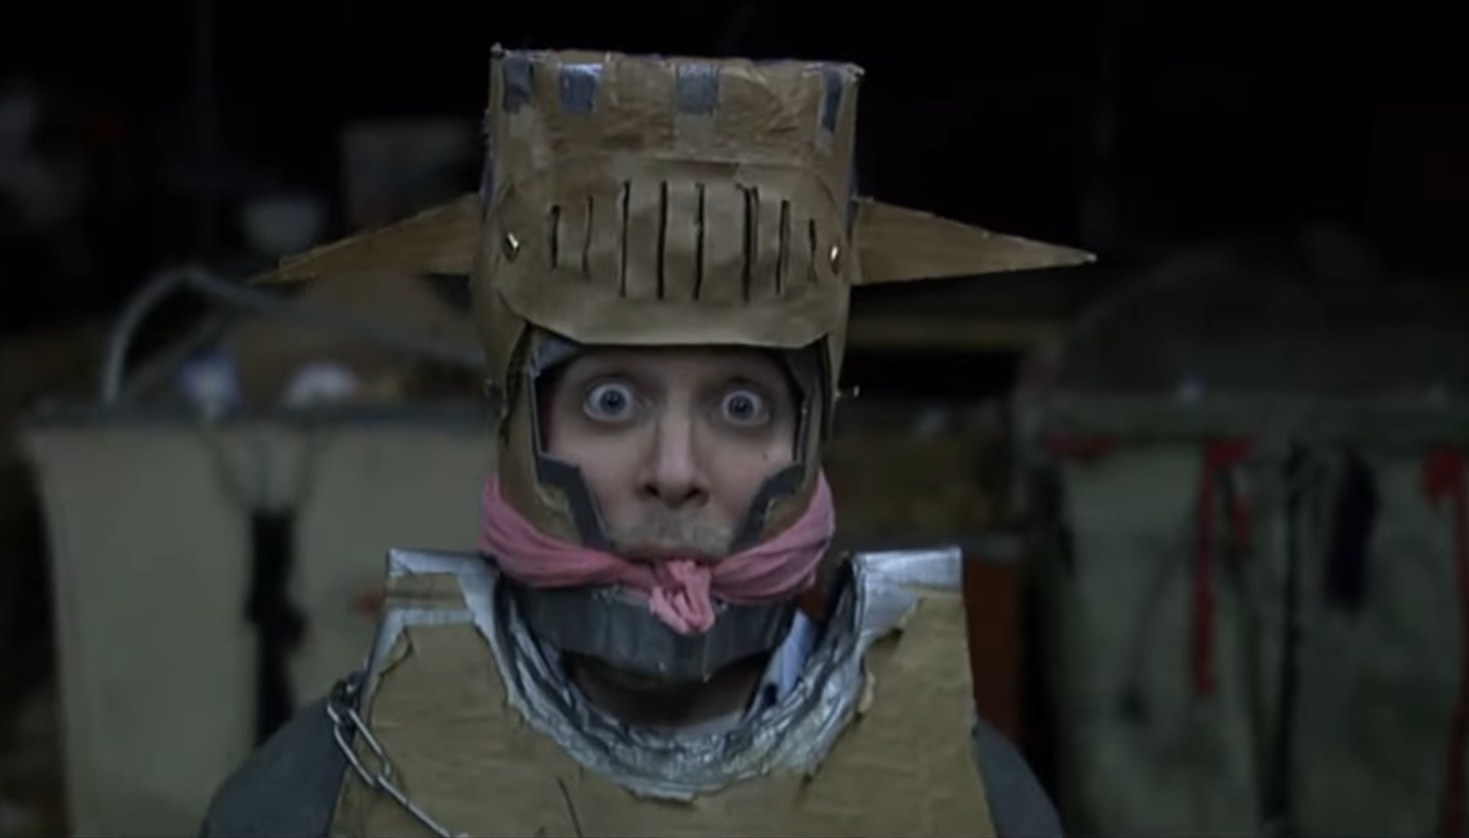 A surprised man in a cardboard Halloween costume is bound and gagged